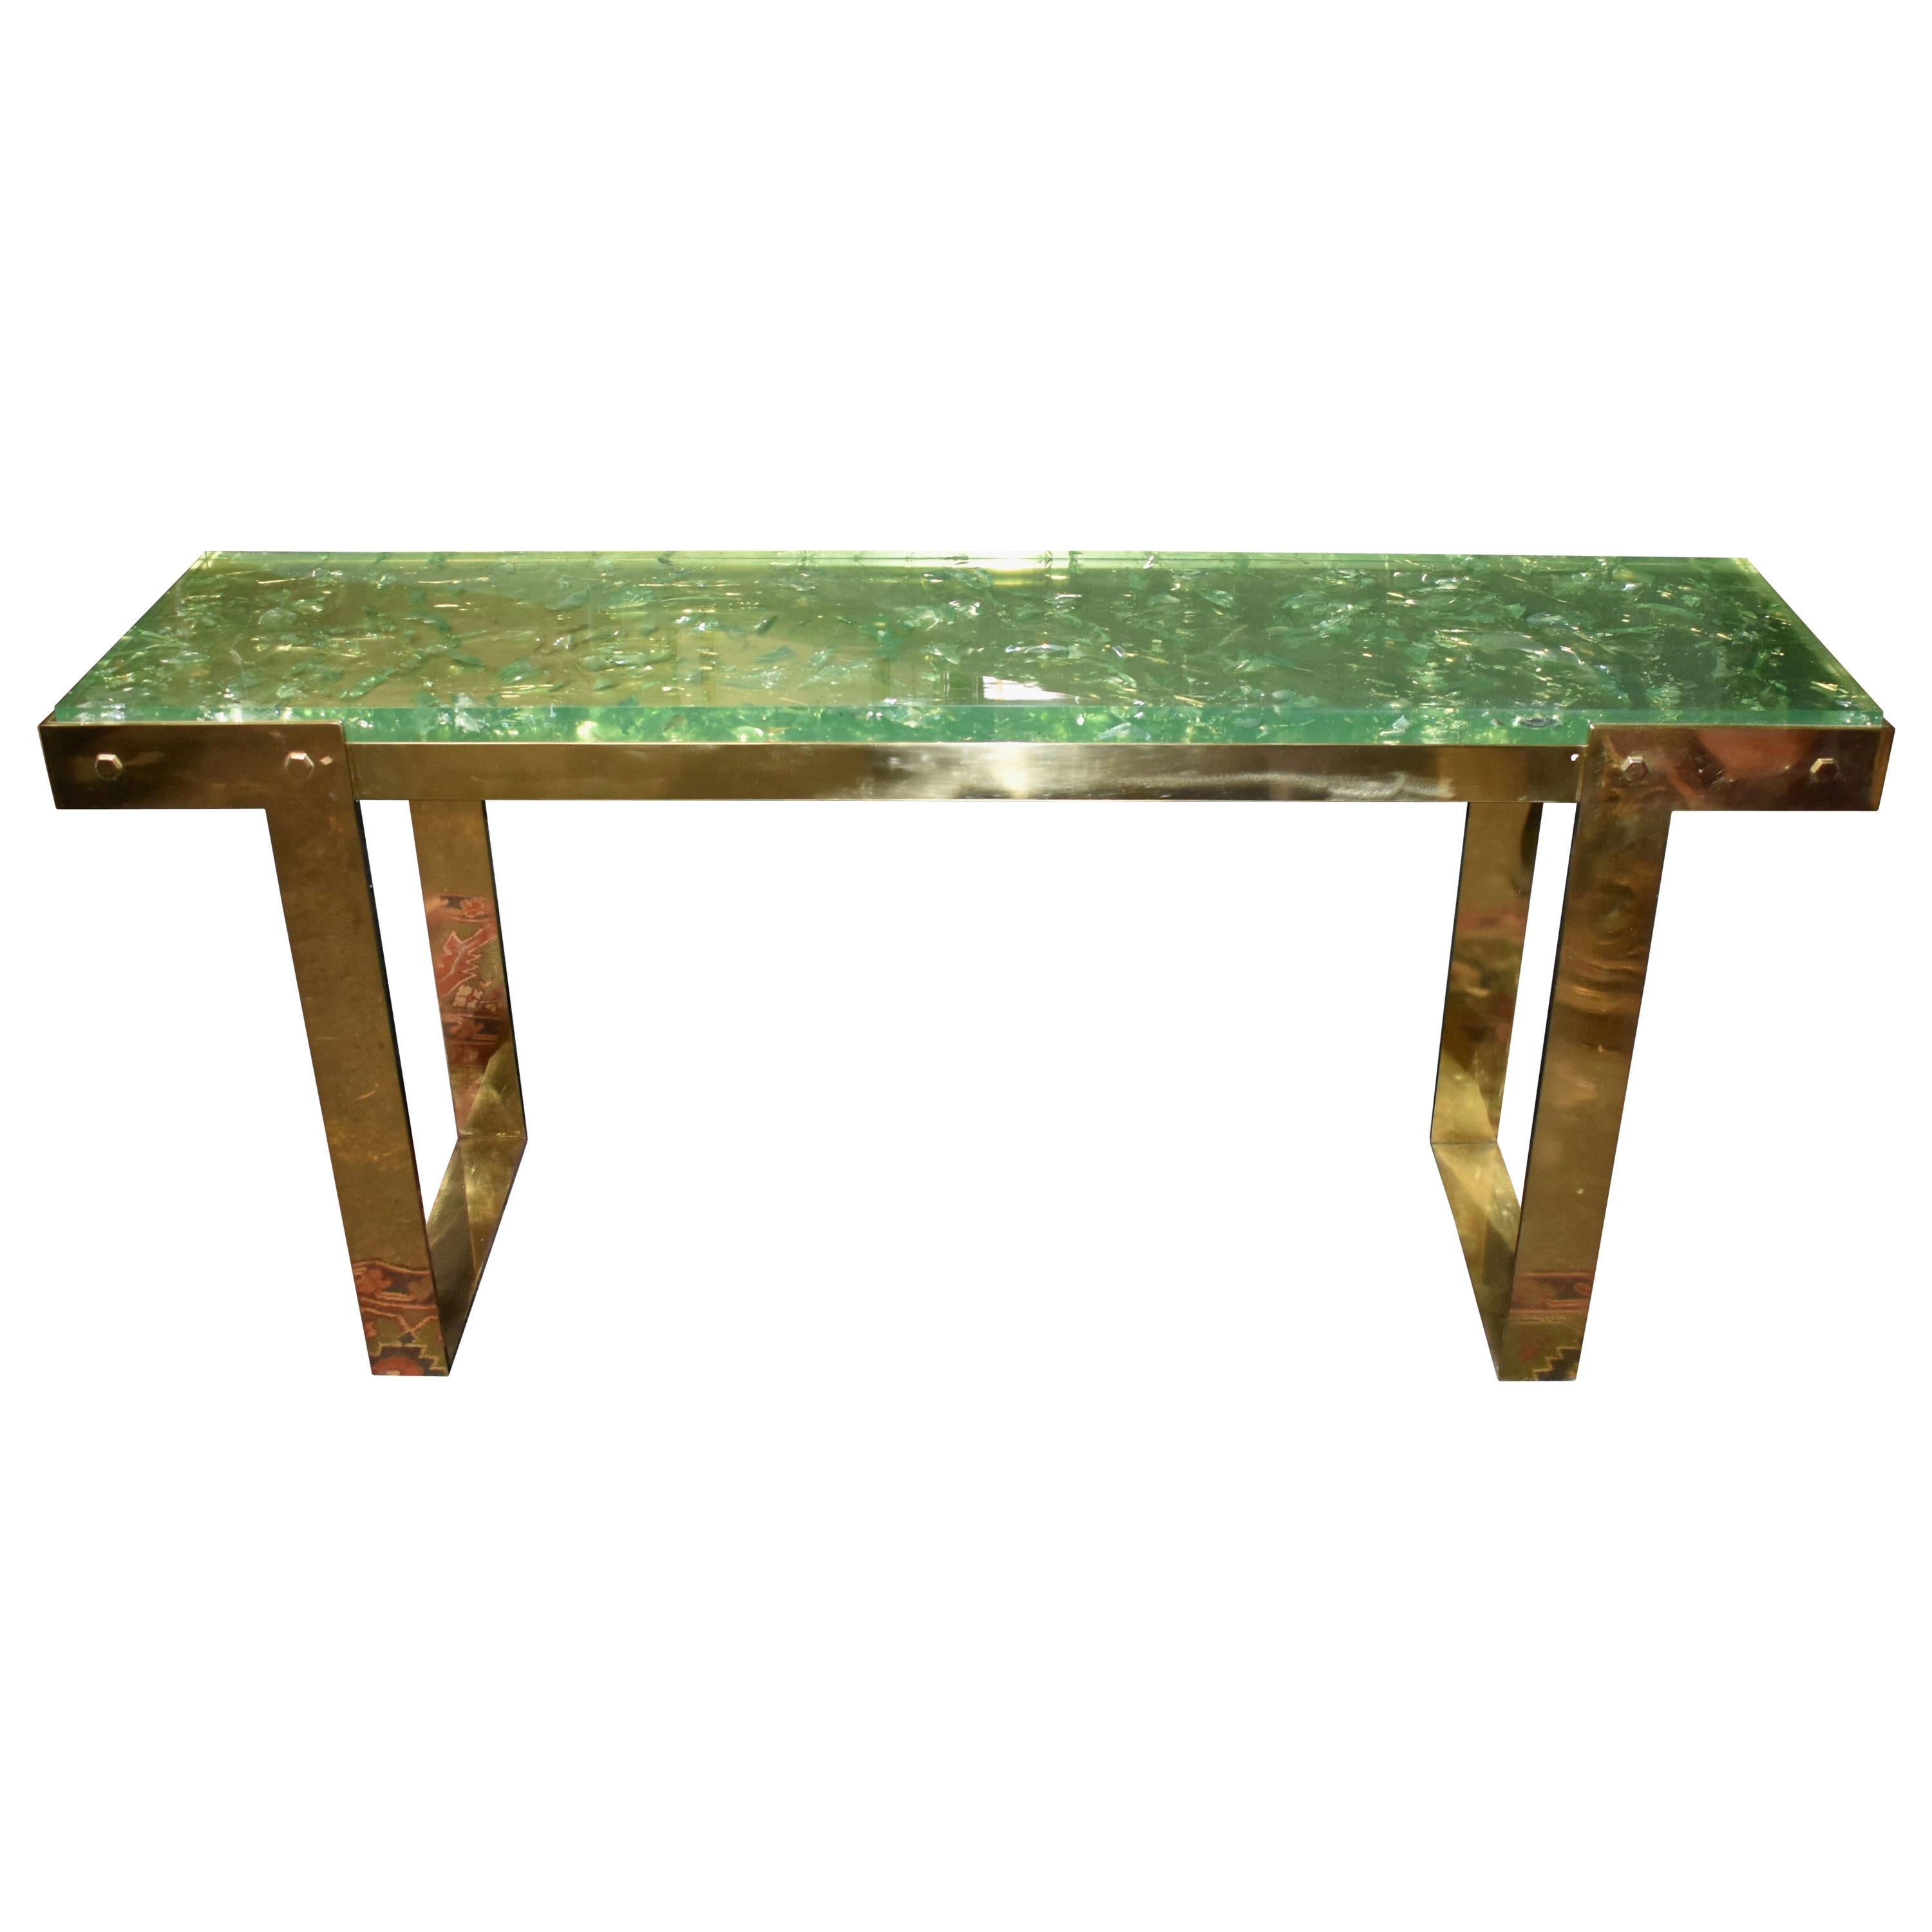 Ice Cracked Resin "Gucci" Style Design Brass Console Table For Sale